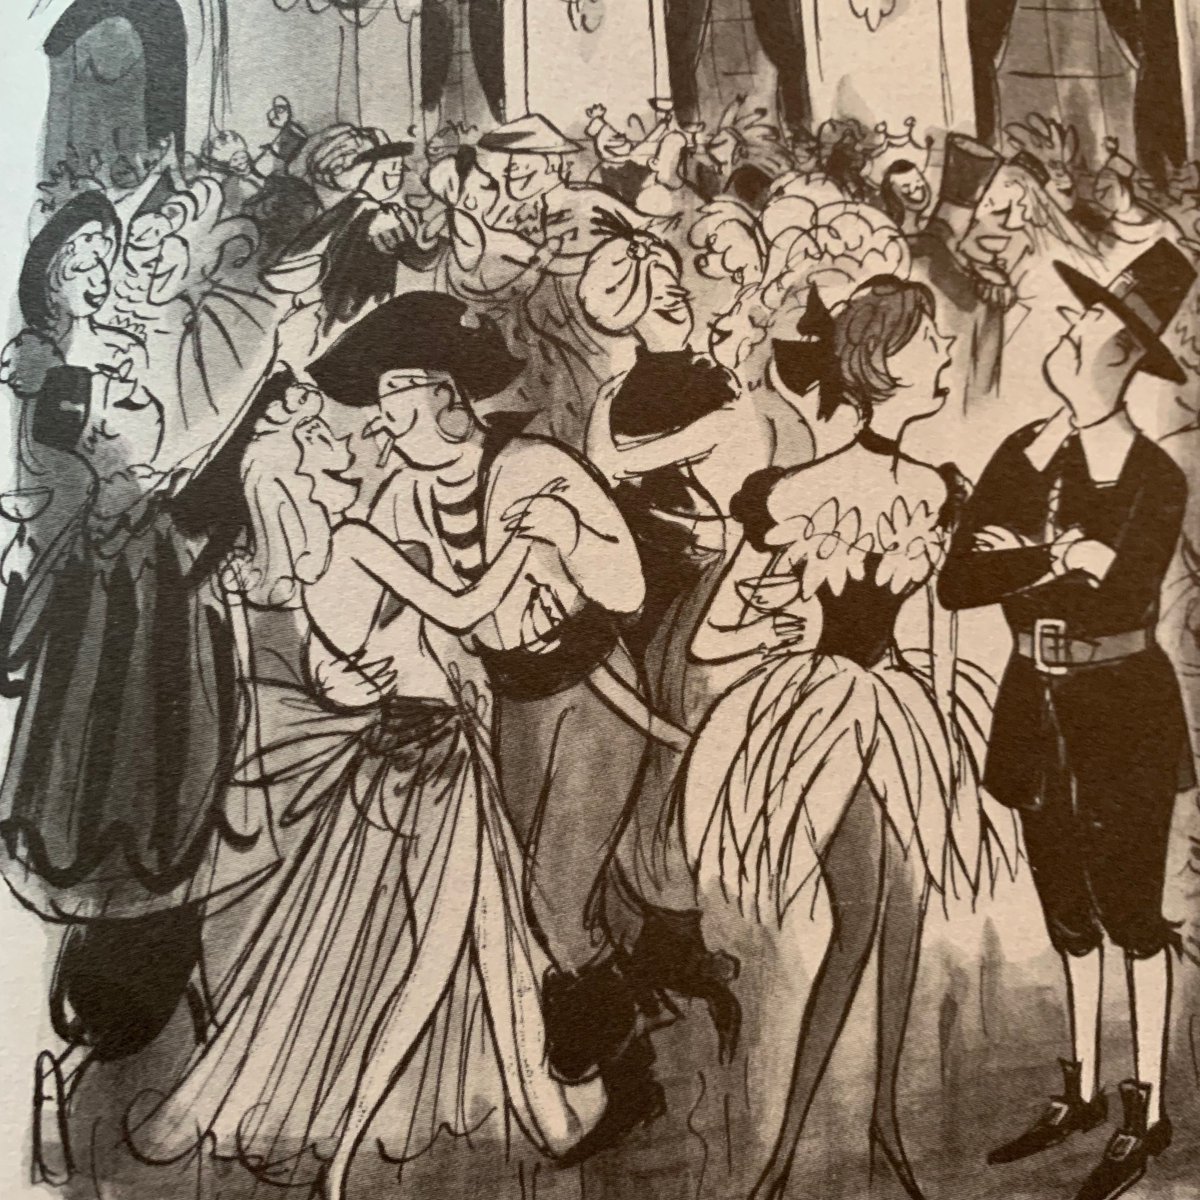 To make this gag work Barney Tobey had to draw a crowd with everyone wearing different costumes. Good thing that gag was totally worth it. #barneytobey #cartoonists #cartooning